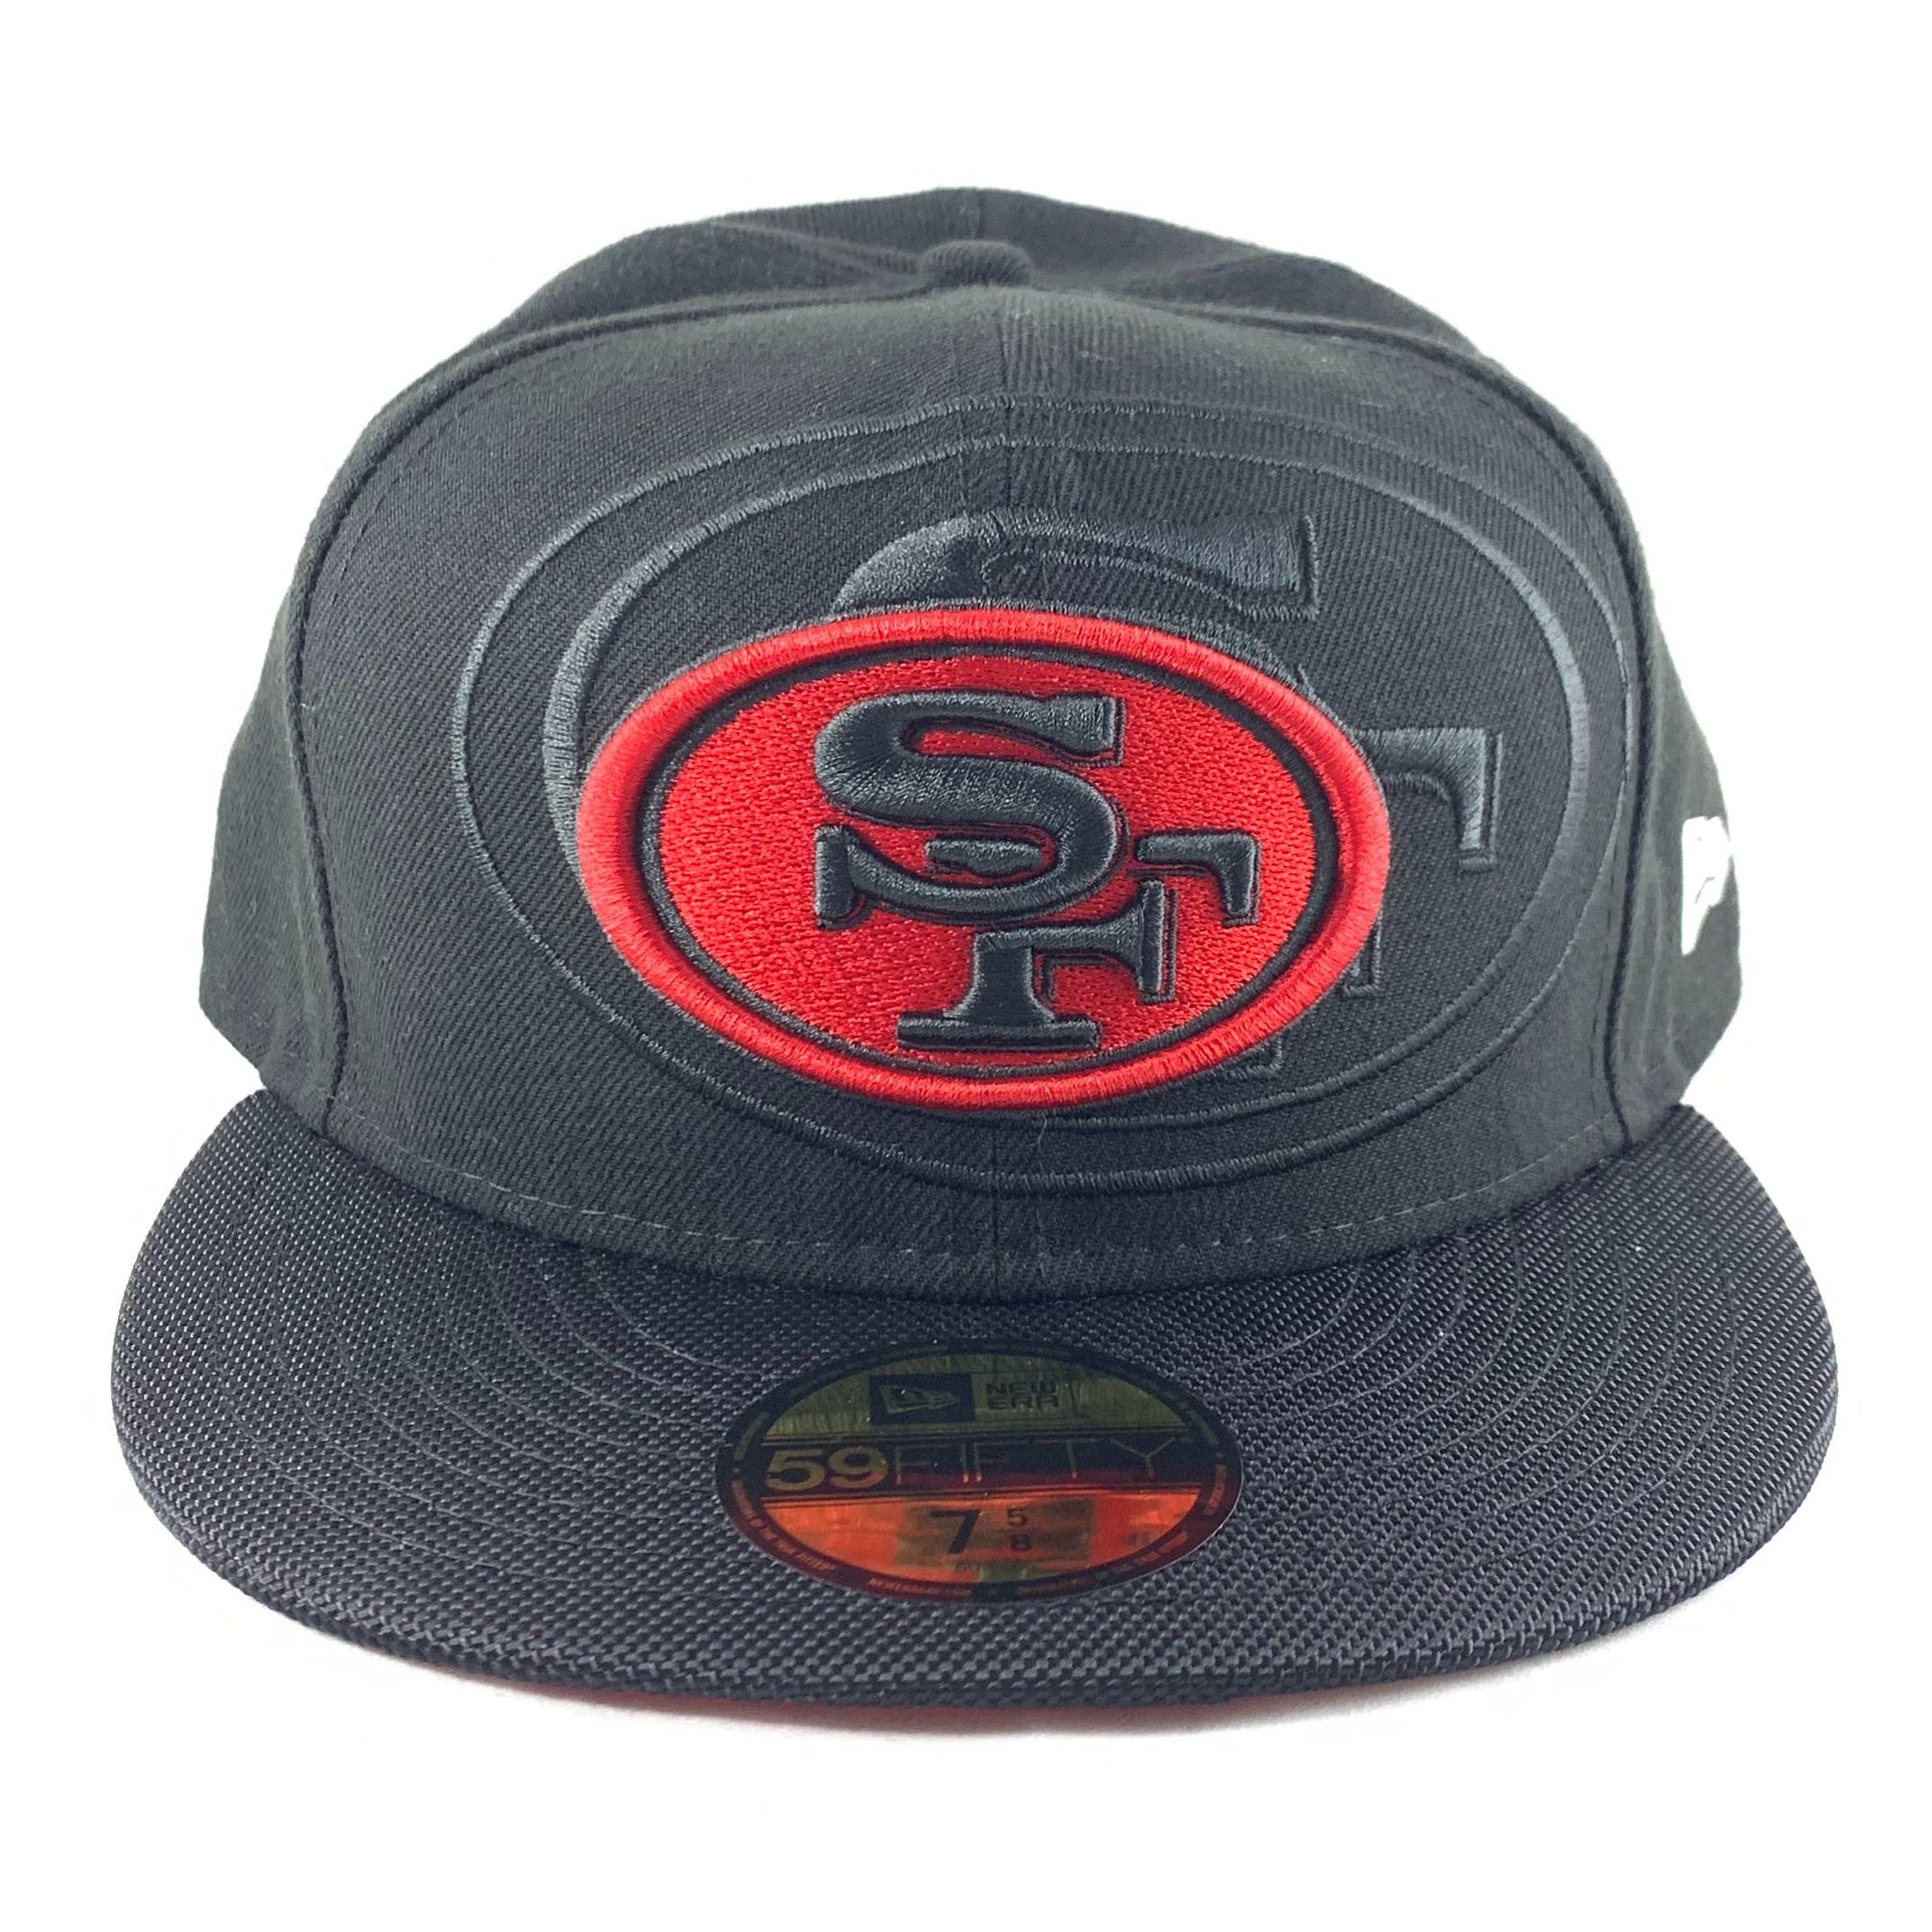 New Era Men NFL Fitted 59FIFTY San Francisco 49ers Black/Red Cap 7 1/4